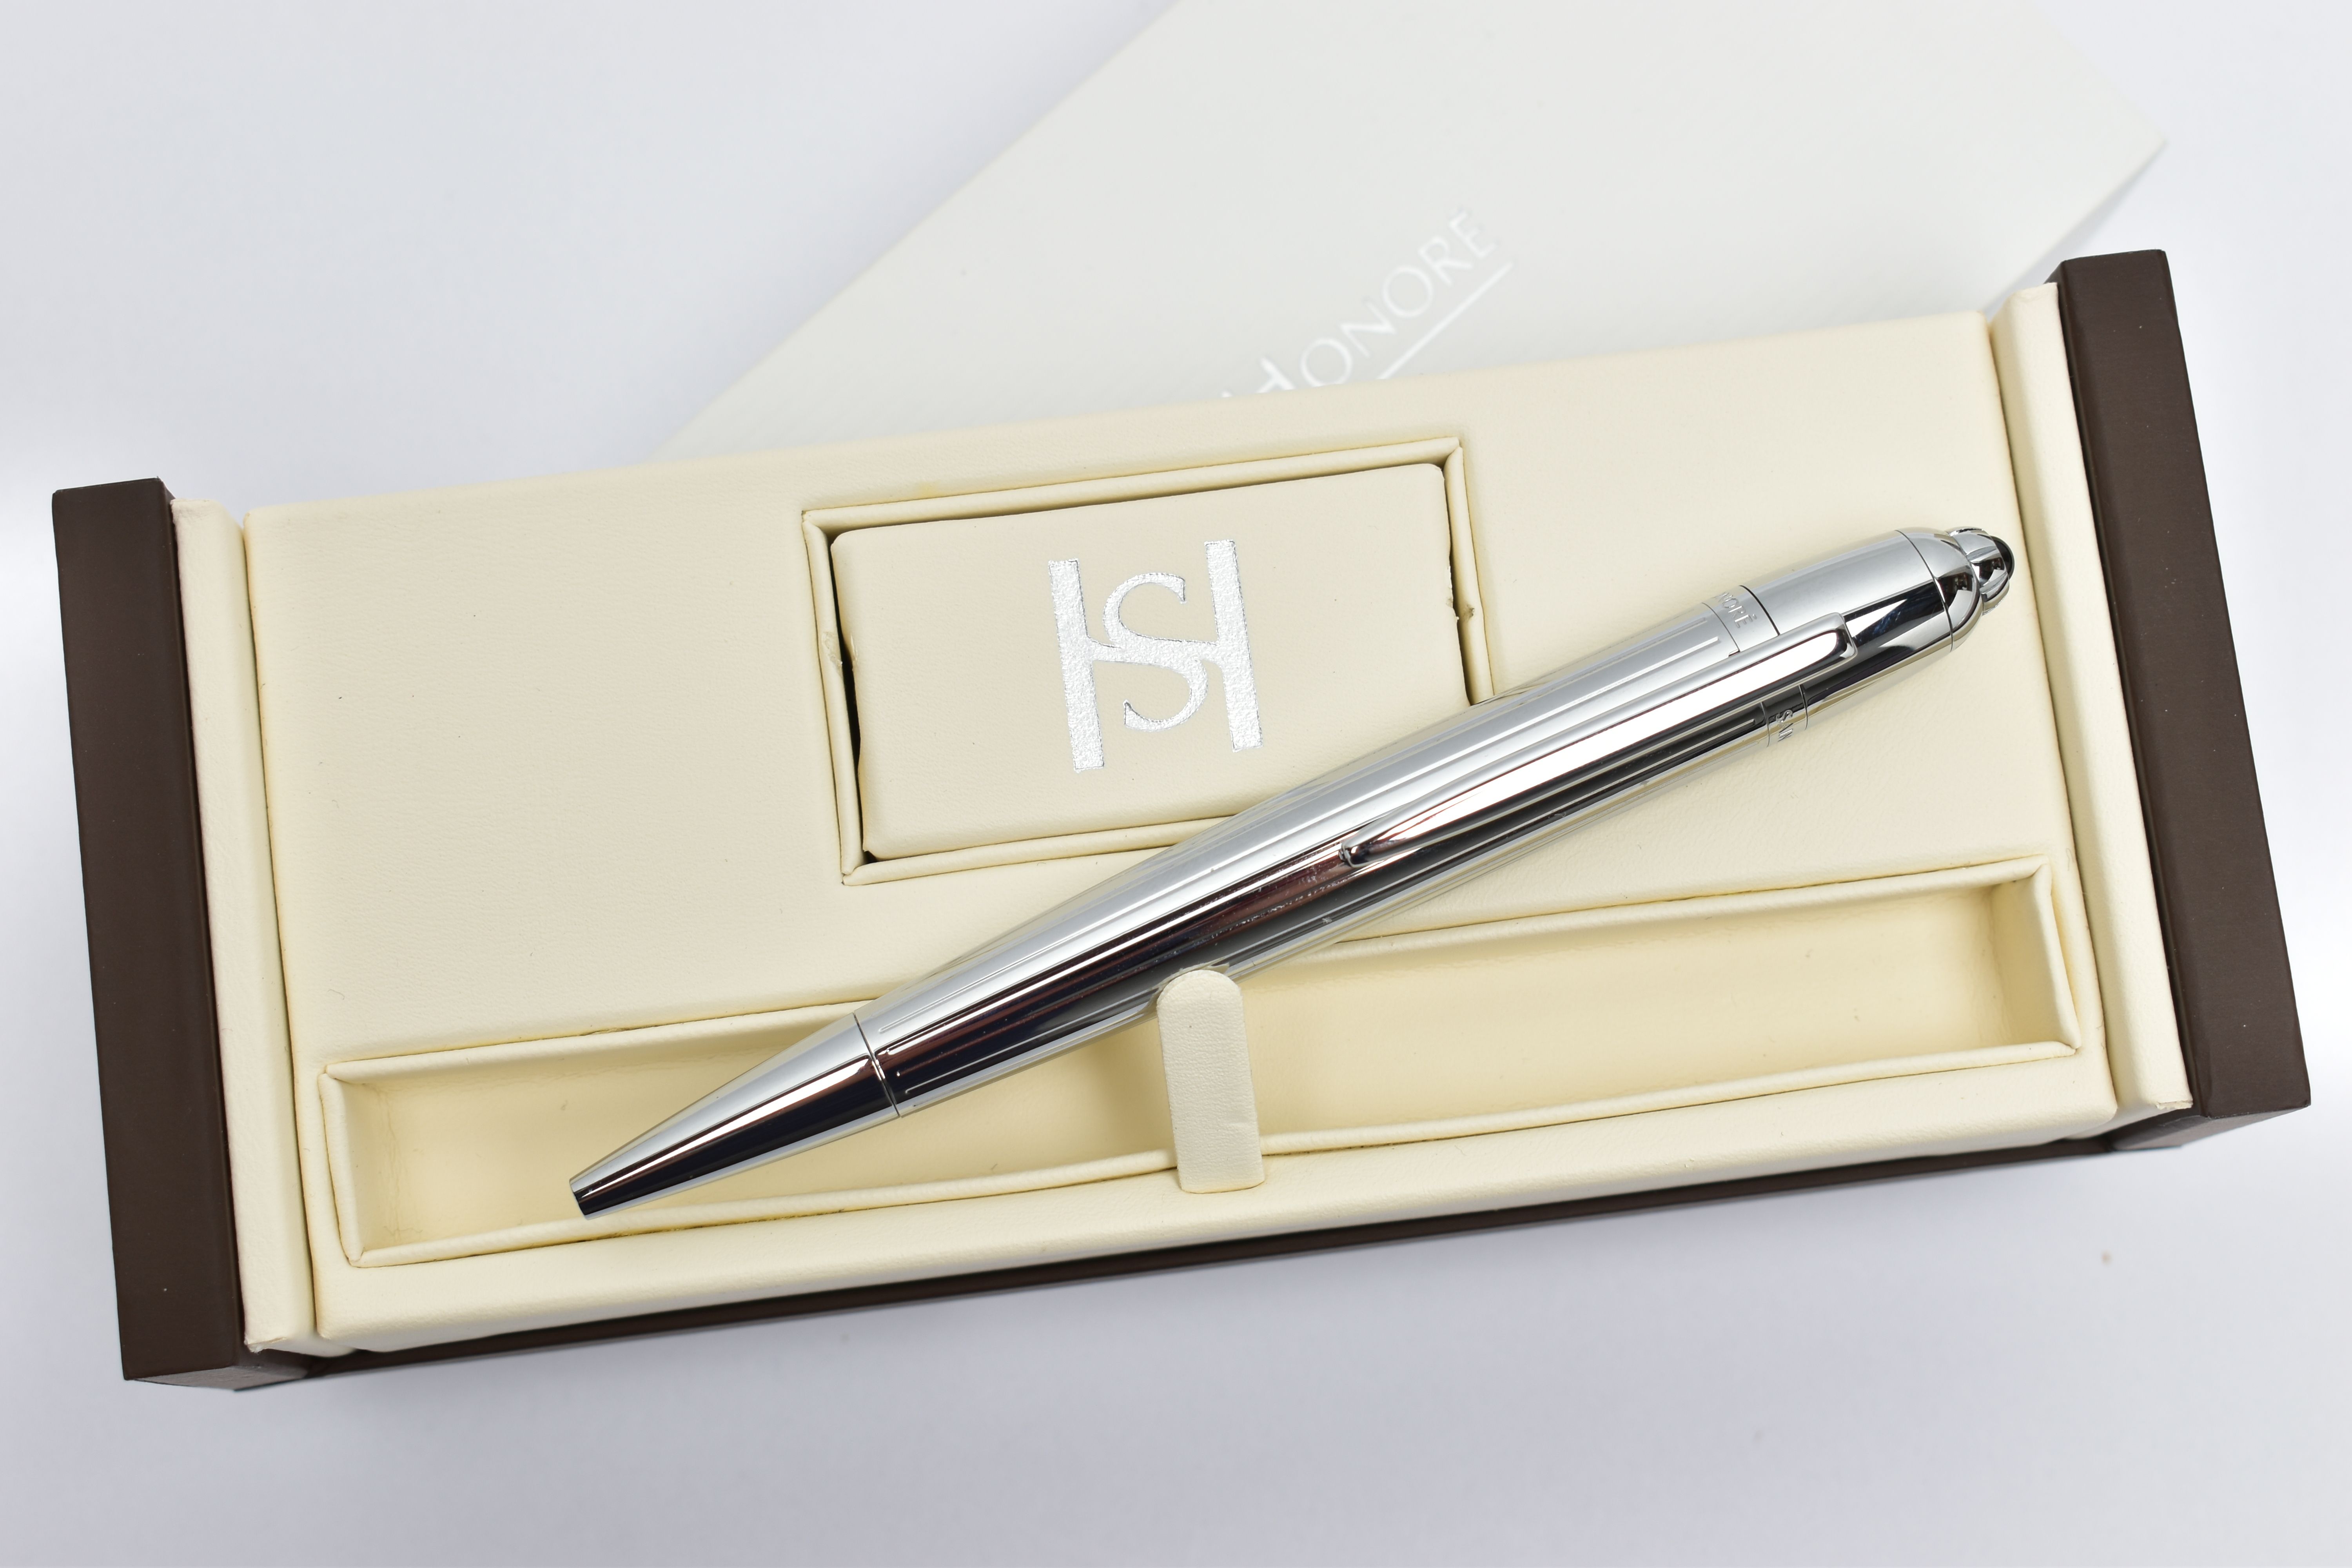 A SAINT HONORE BALLPOINT PEN, a white metal twist weighted pen, detailed with a linear grooved